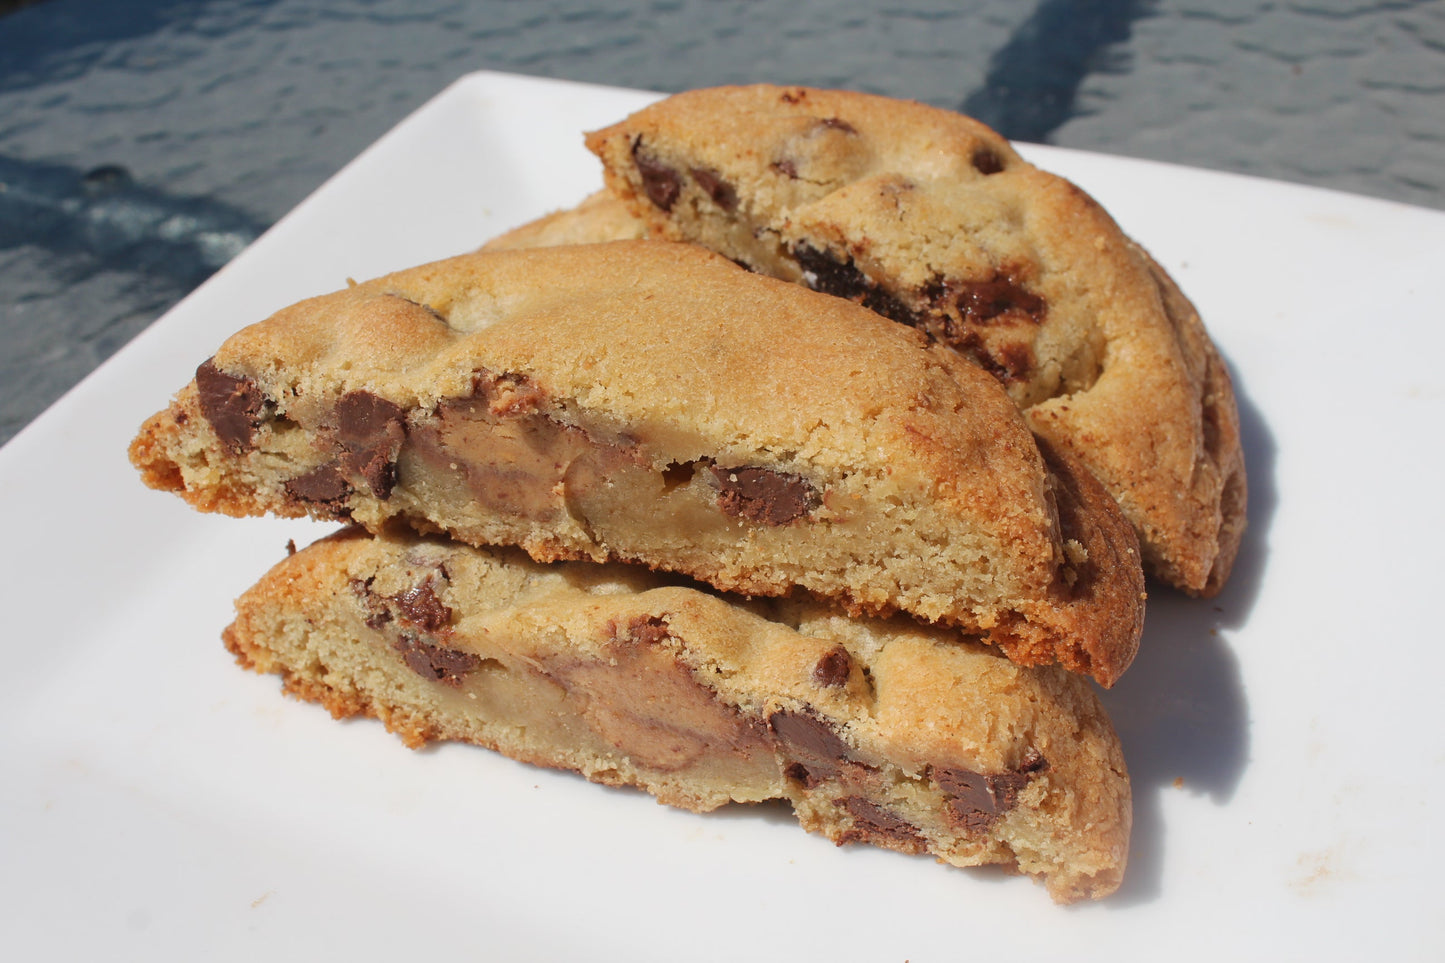 Chocolate Chip Stuffed Peanut Butter Cup Cookie